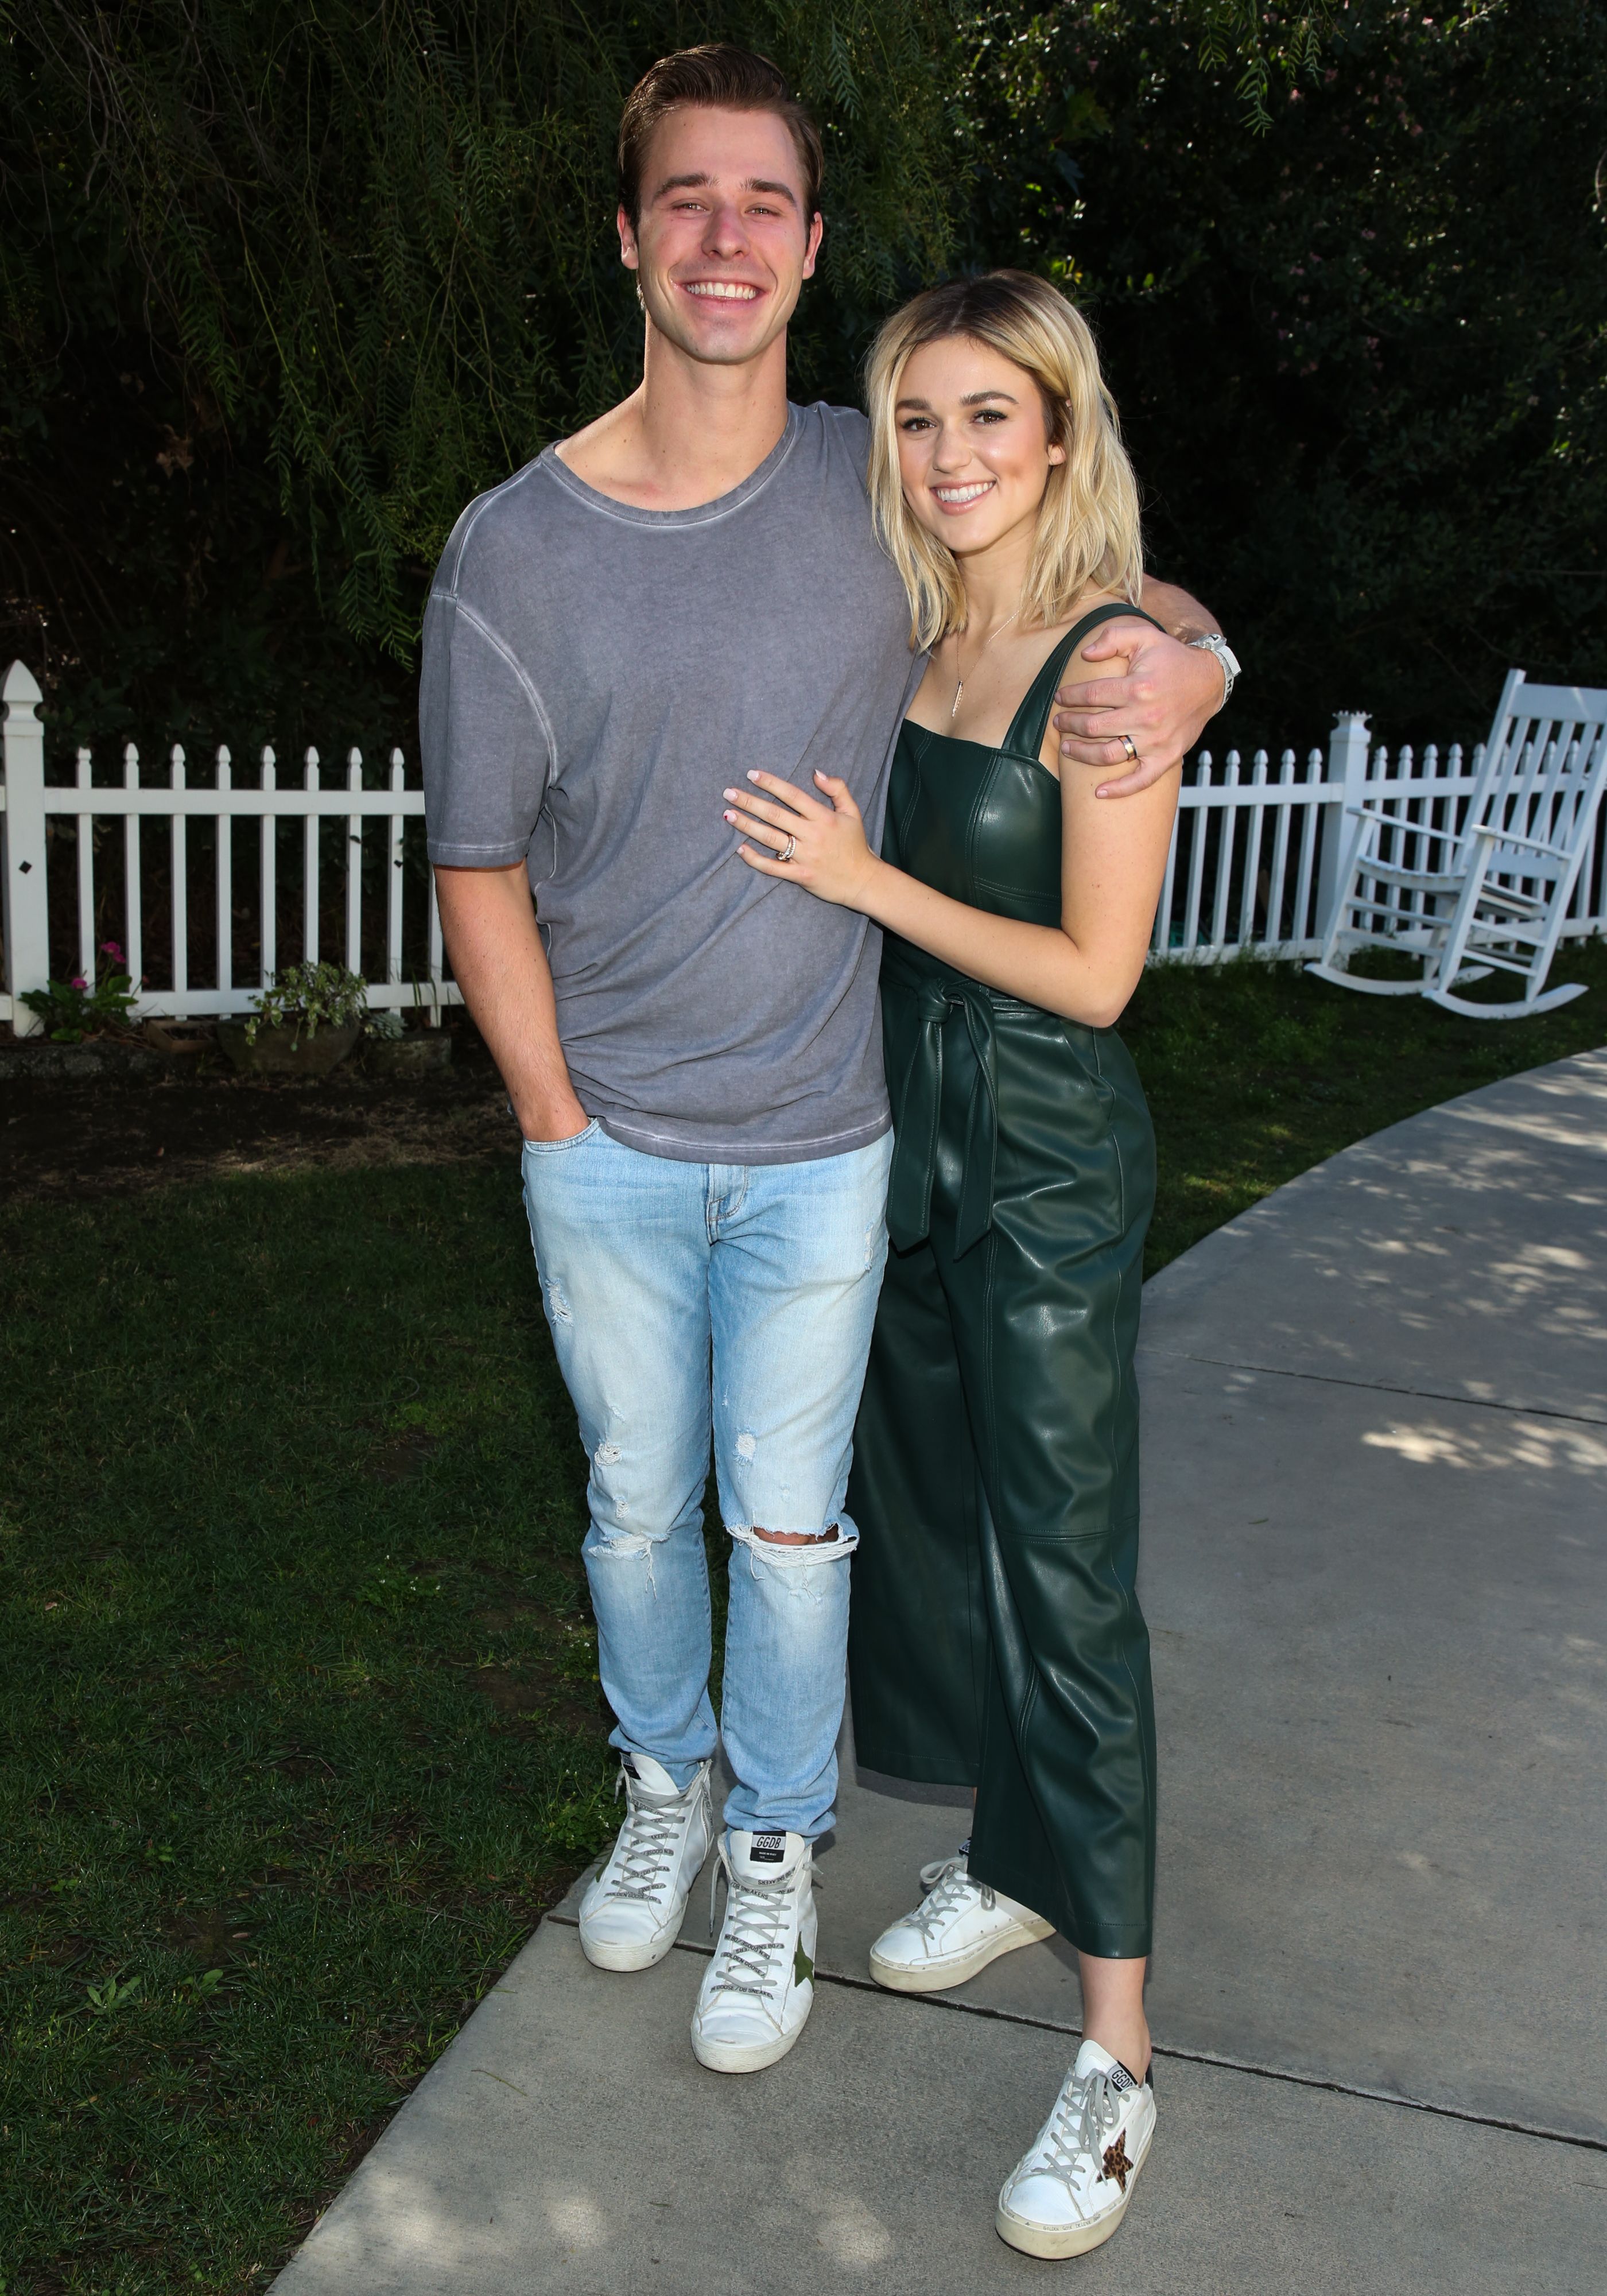 Actress Sadie Robertson and her Husband Christian Huff at Hallmark Channel's "Home & Family" at Universal Studios Hollywood on February 26, 2020 | Photo: Getty Images